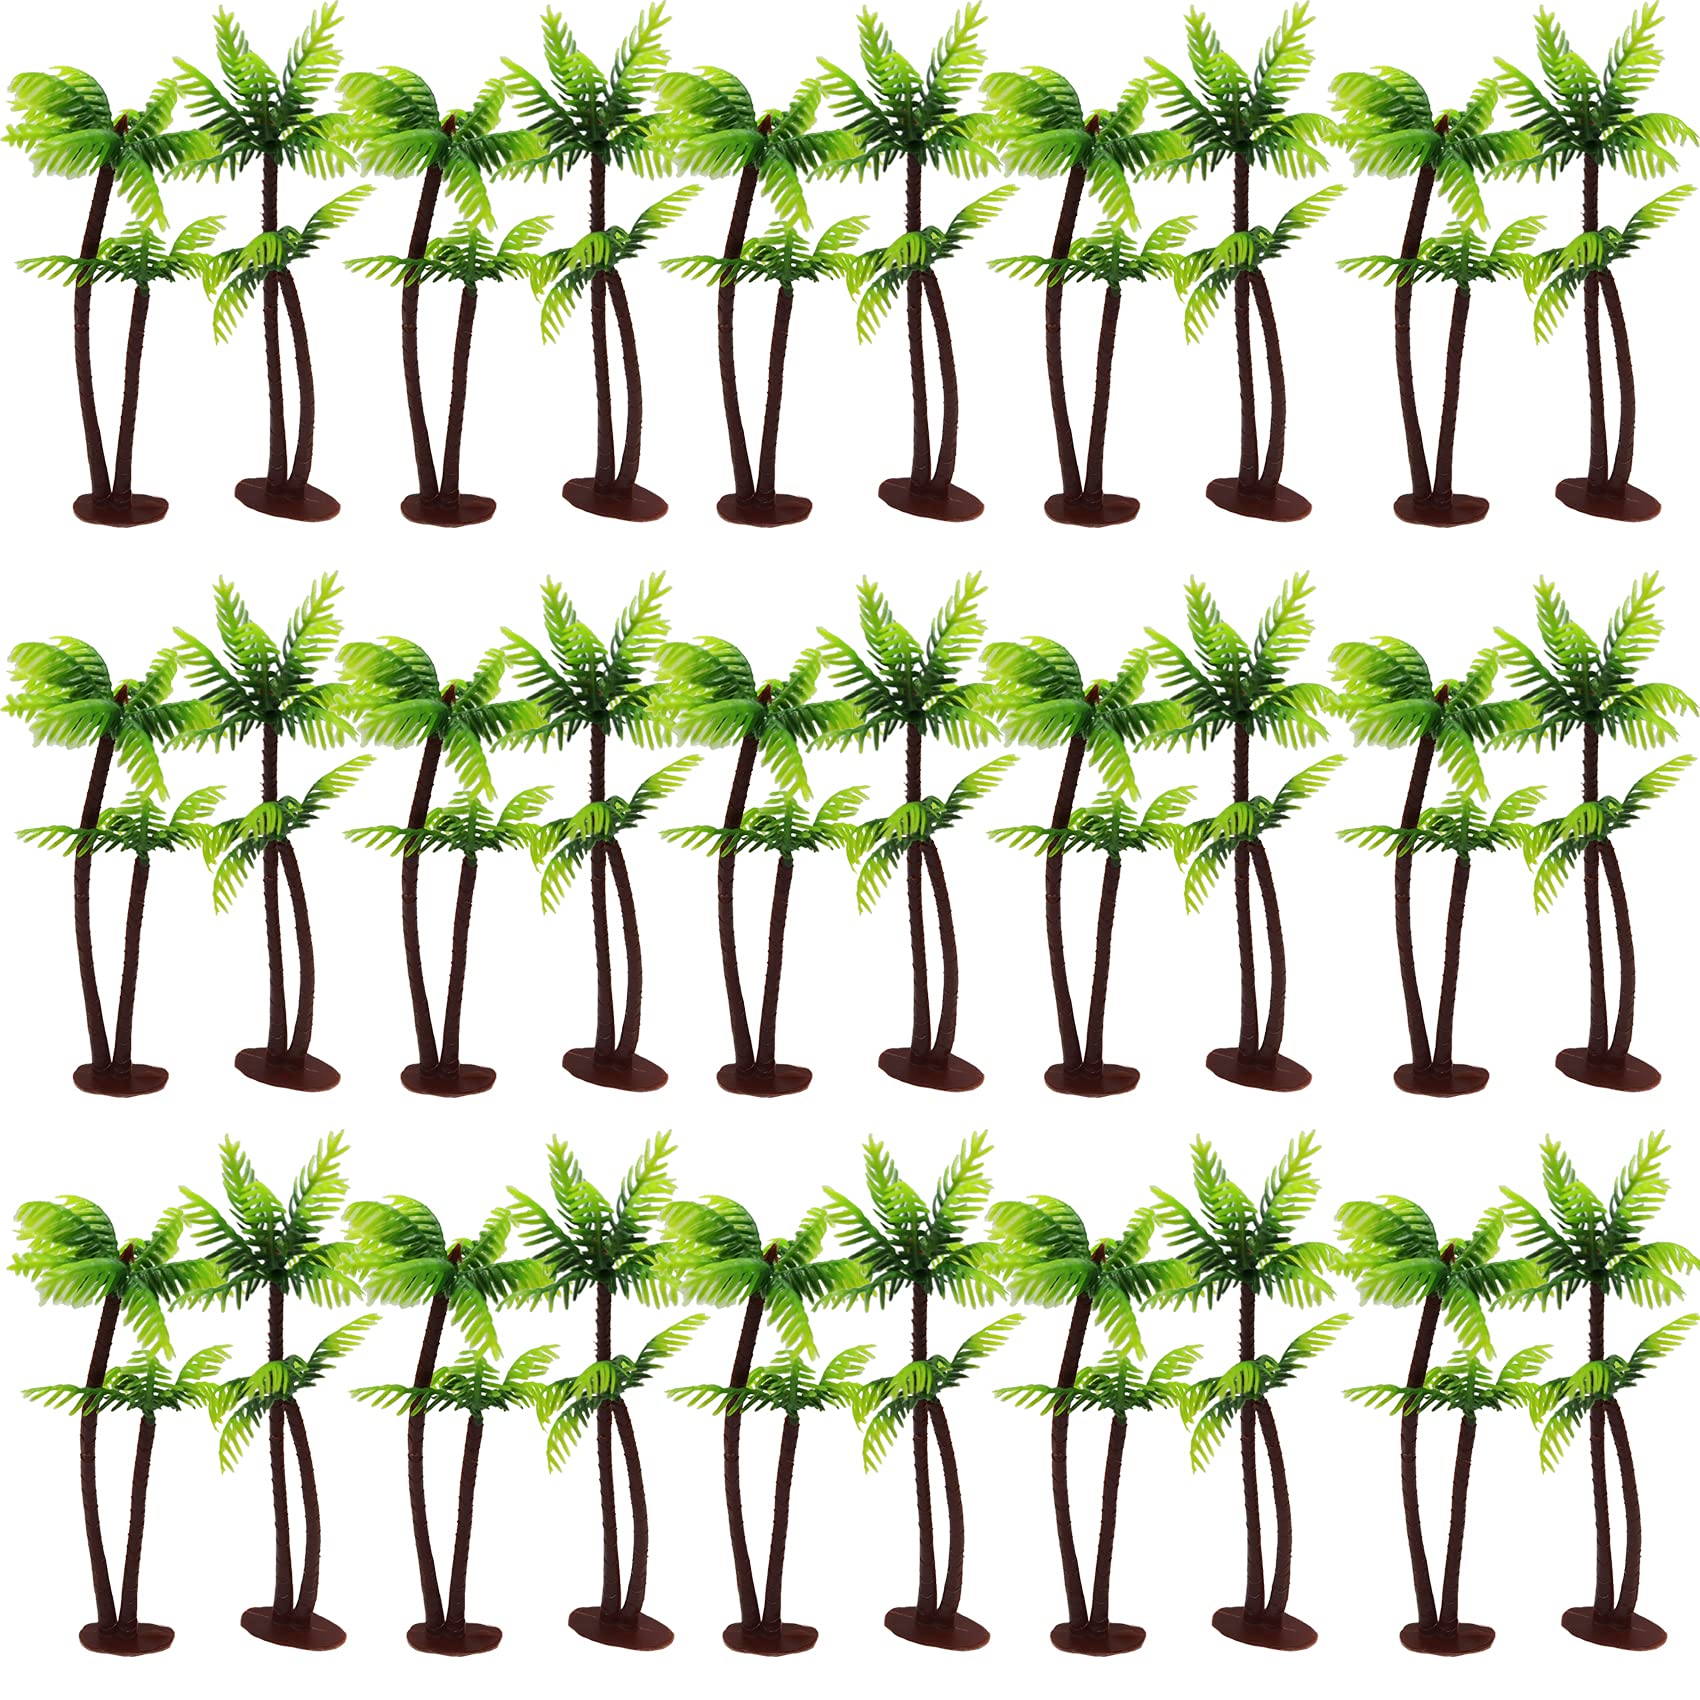 YOOHUA 25PCS Coconut Palm Model Artificial Trees/Cake Topper - Charming Cupcake Topper Scenery Model Scenery Model for Cake Decorations or Building Model Landscape Artificial Plants